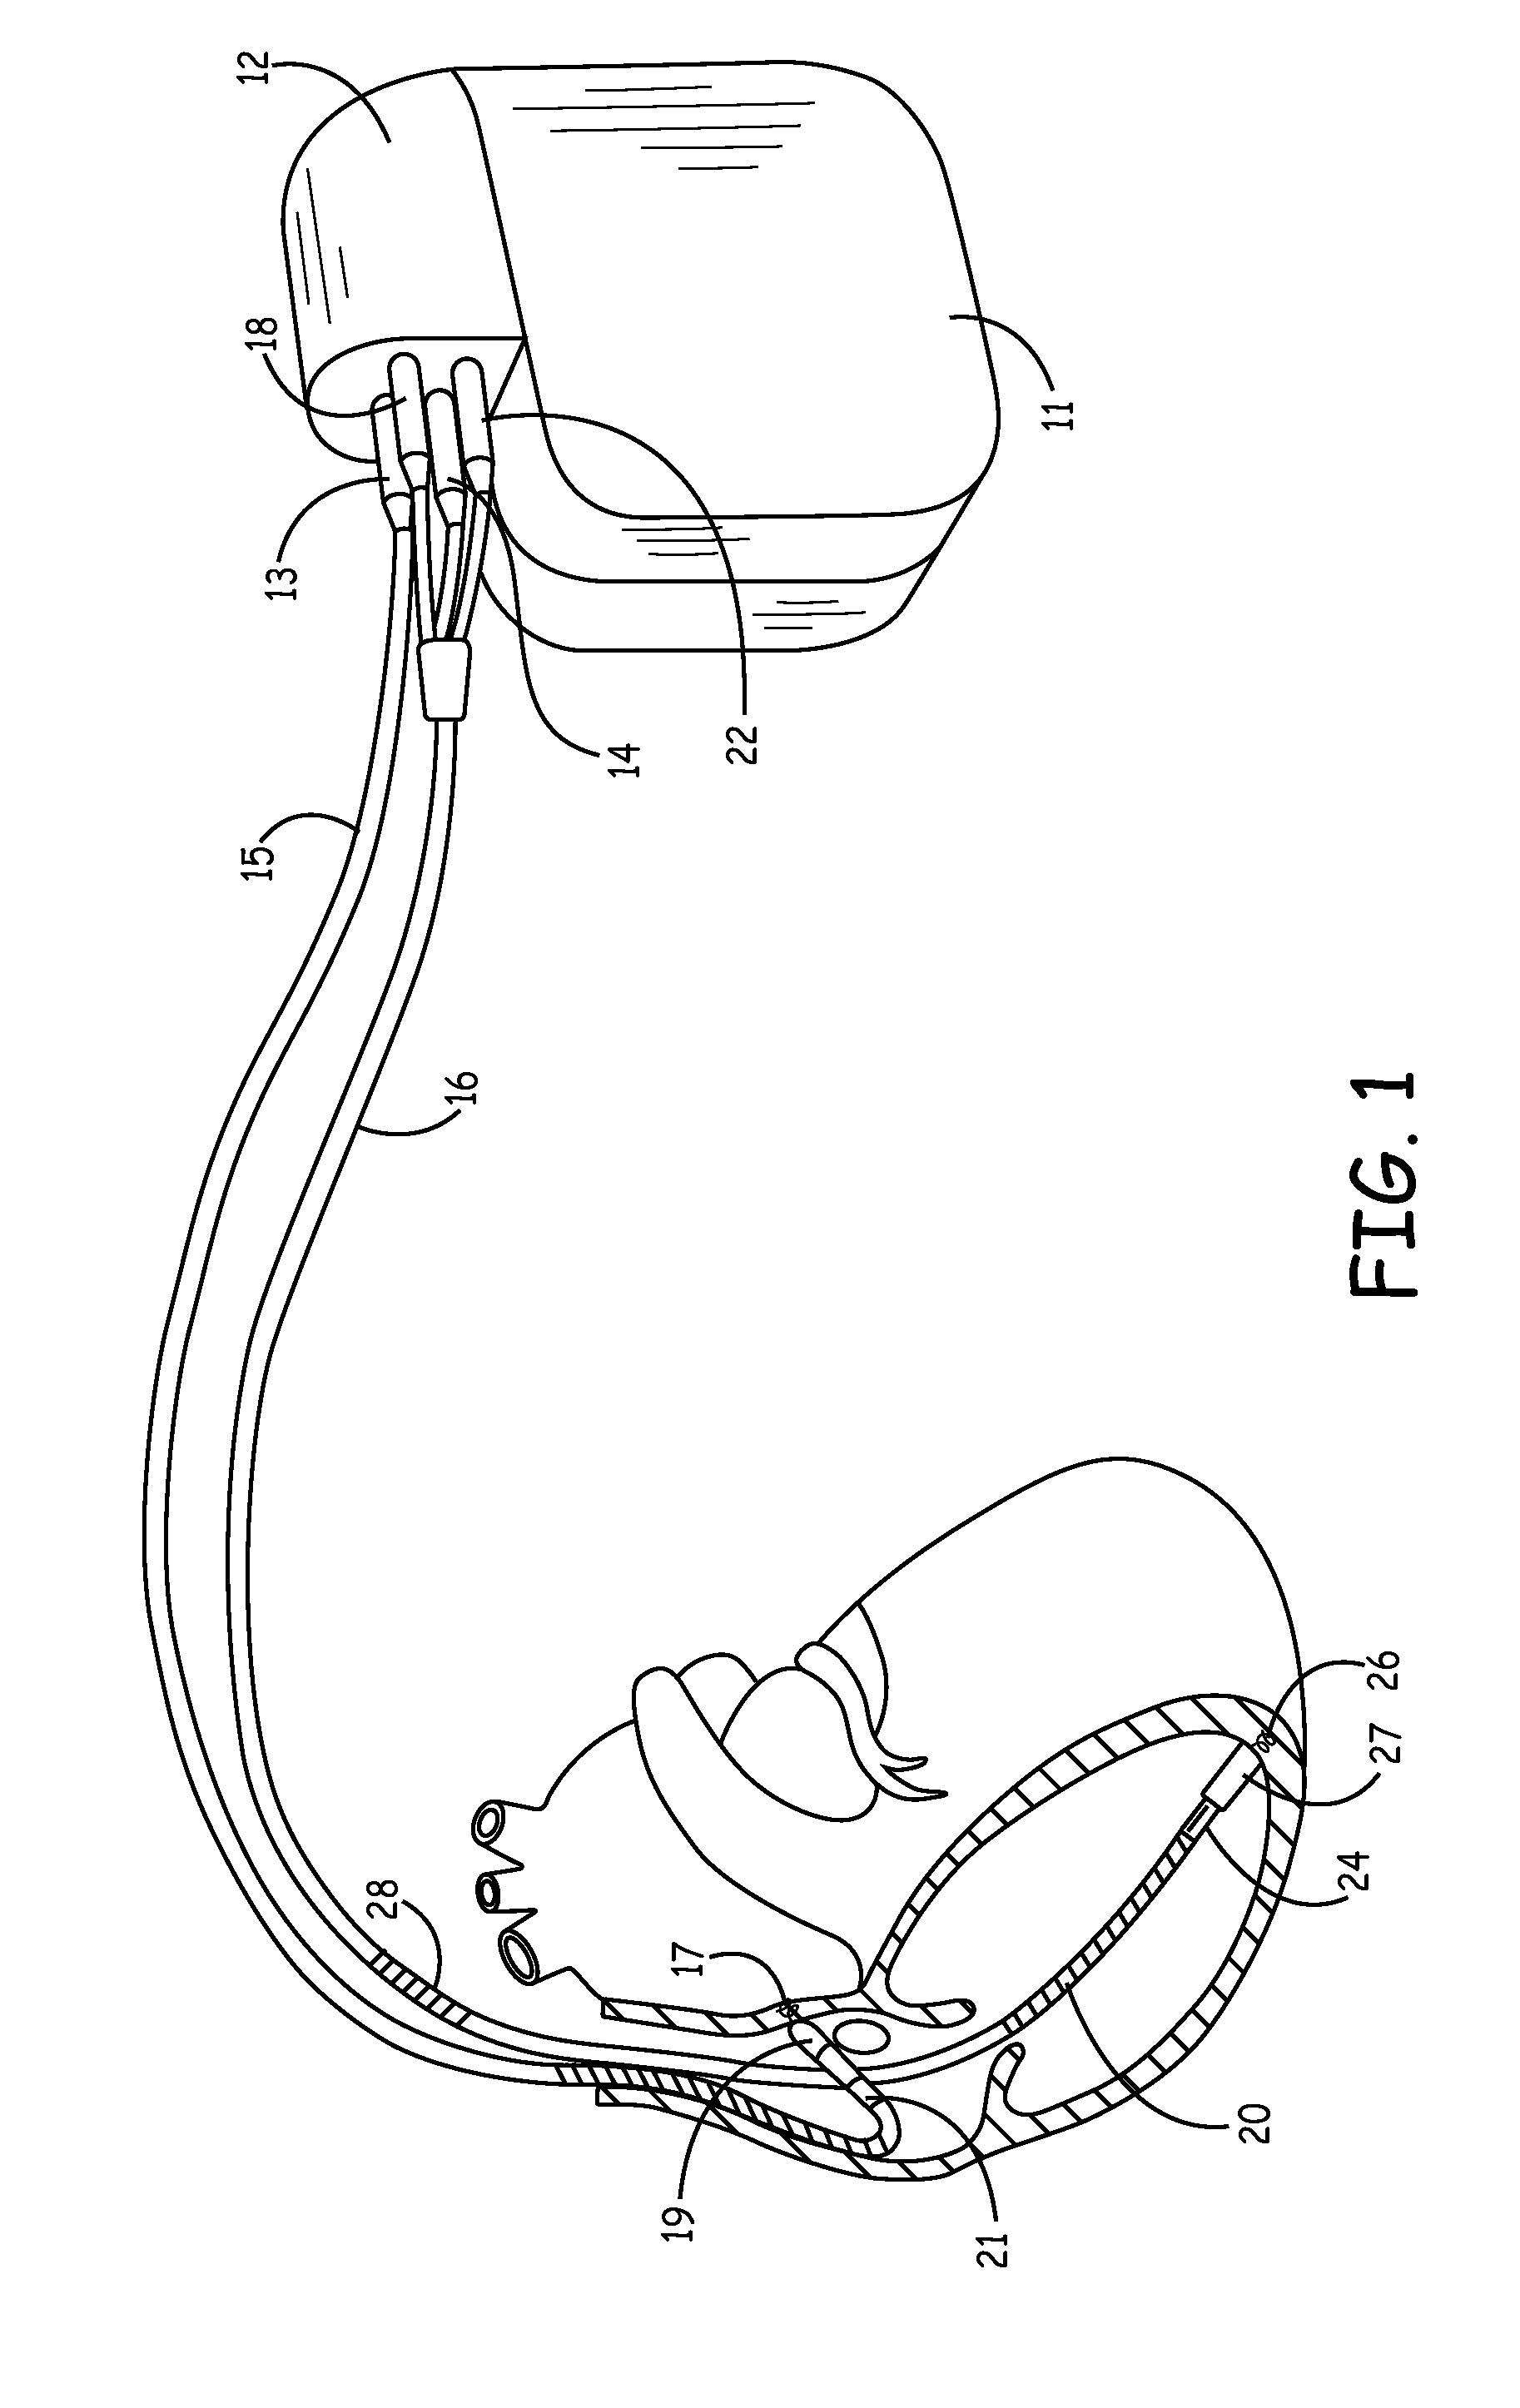 Method and apparatus for detecting and treating tachyarrhythmias incorporating diagnostic/therapeutic pacing techniques